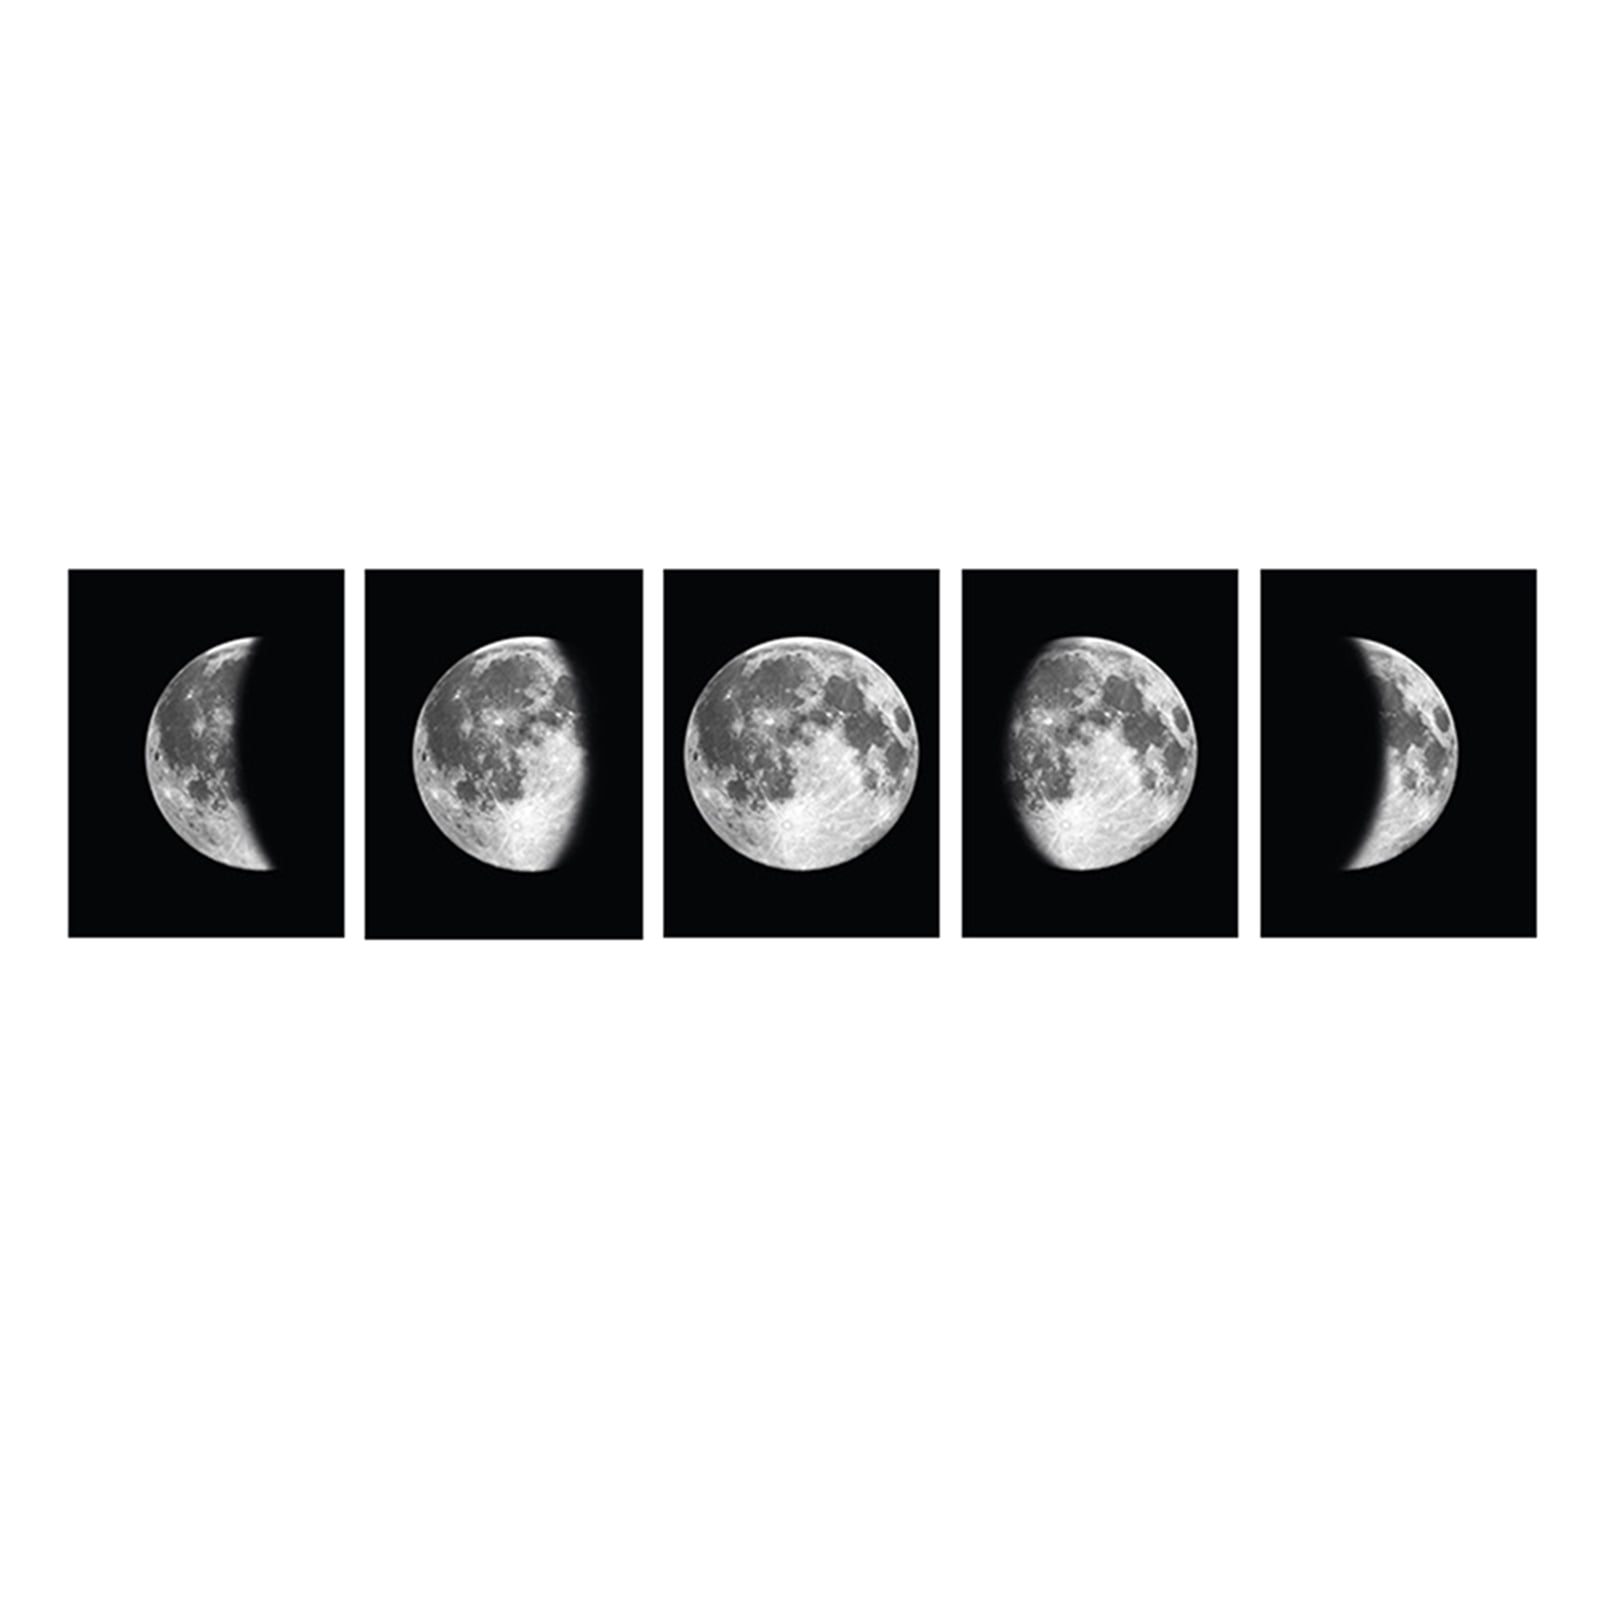 Evening Moon HD Canvas prints Painting Home decor Picture Wall art Poster 16x20" 